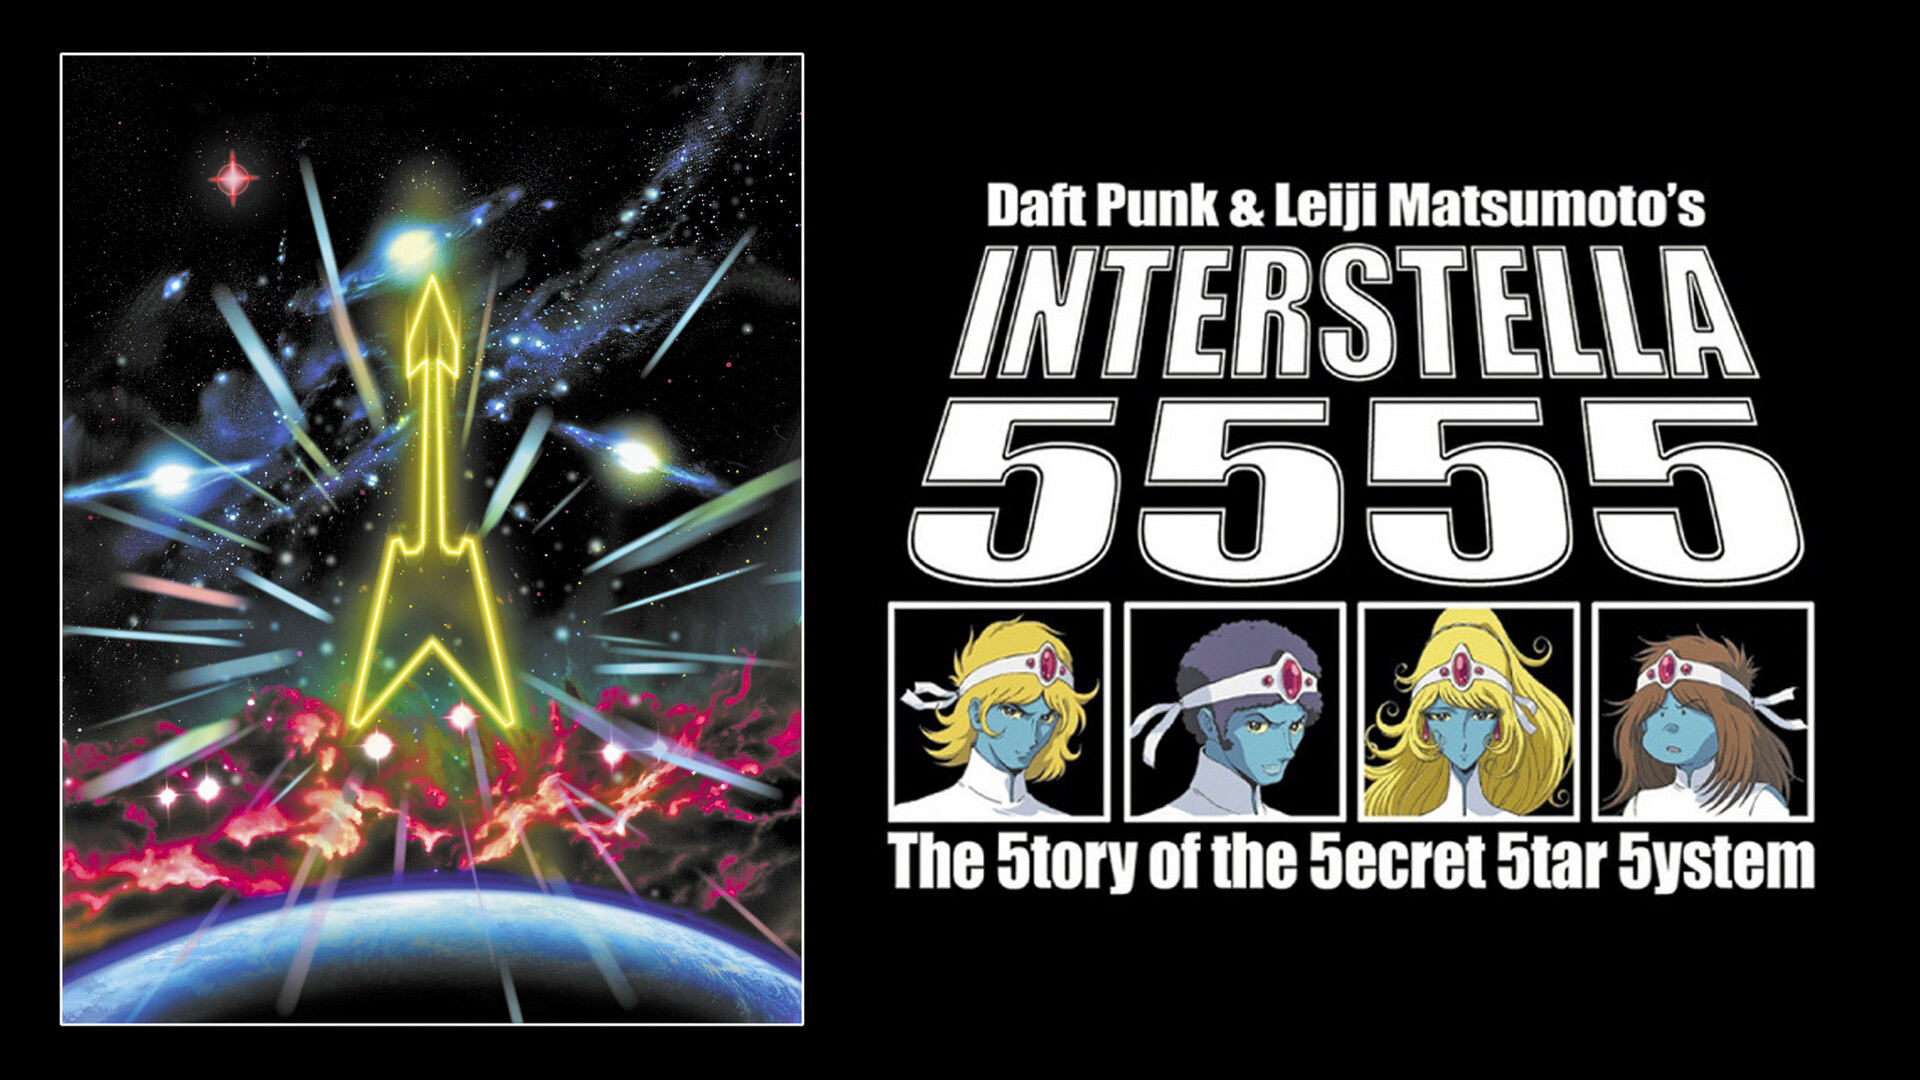 39-facts-about-the-movie-interstella-5555-the-5tory-of-the-5ecret-5tar-5ystem